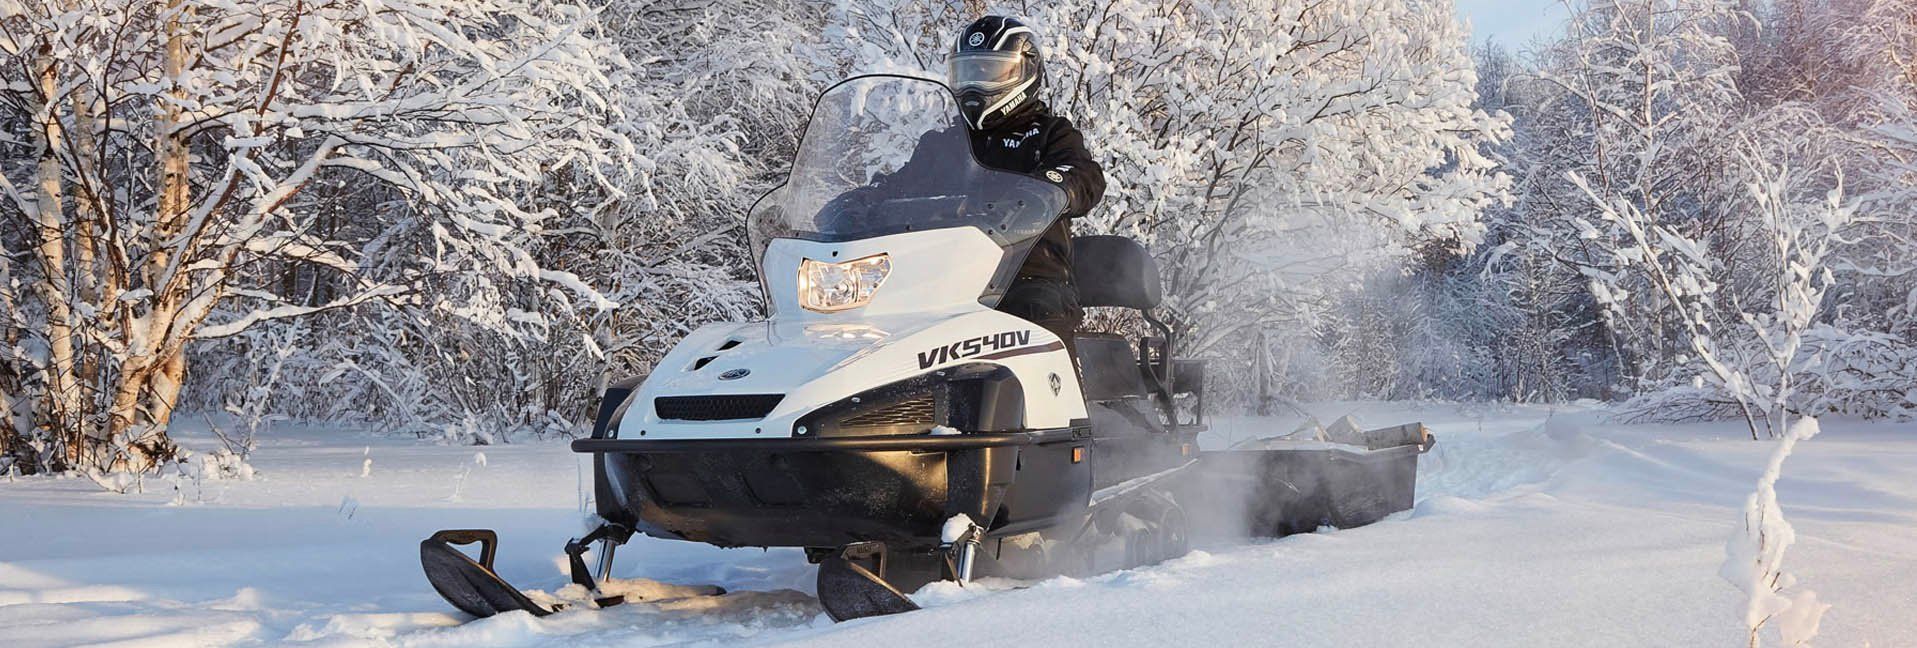 Fun’s A-Coming, snow machines make winter worthwhile